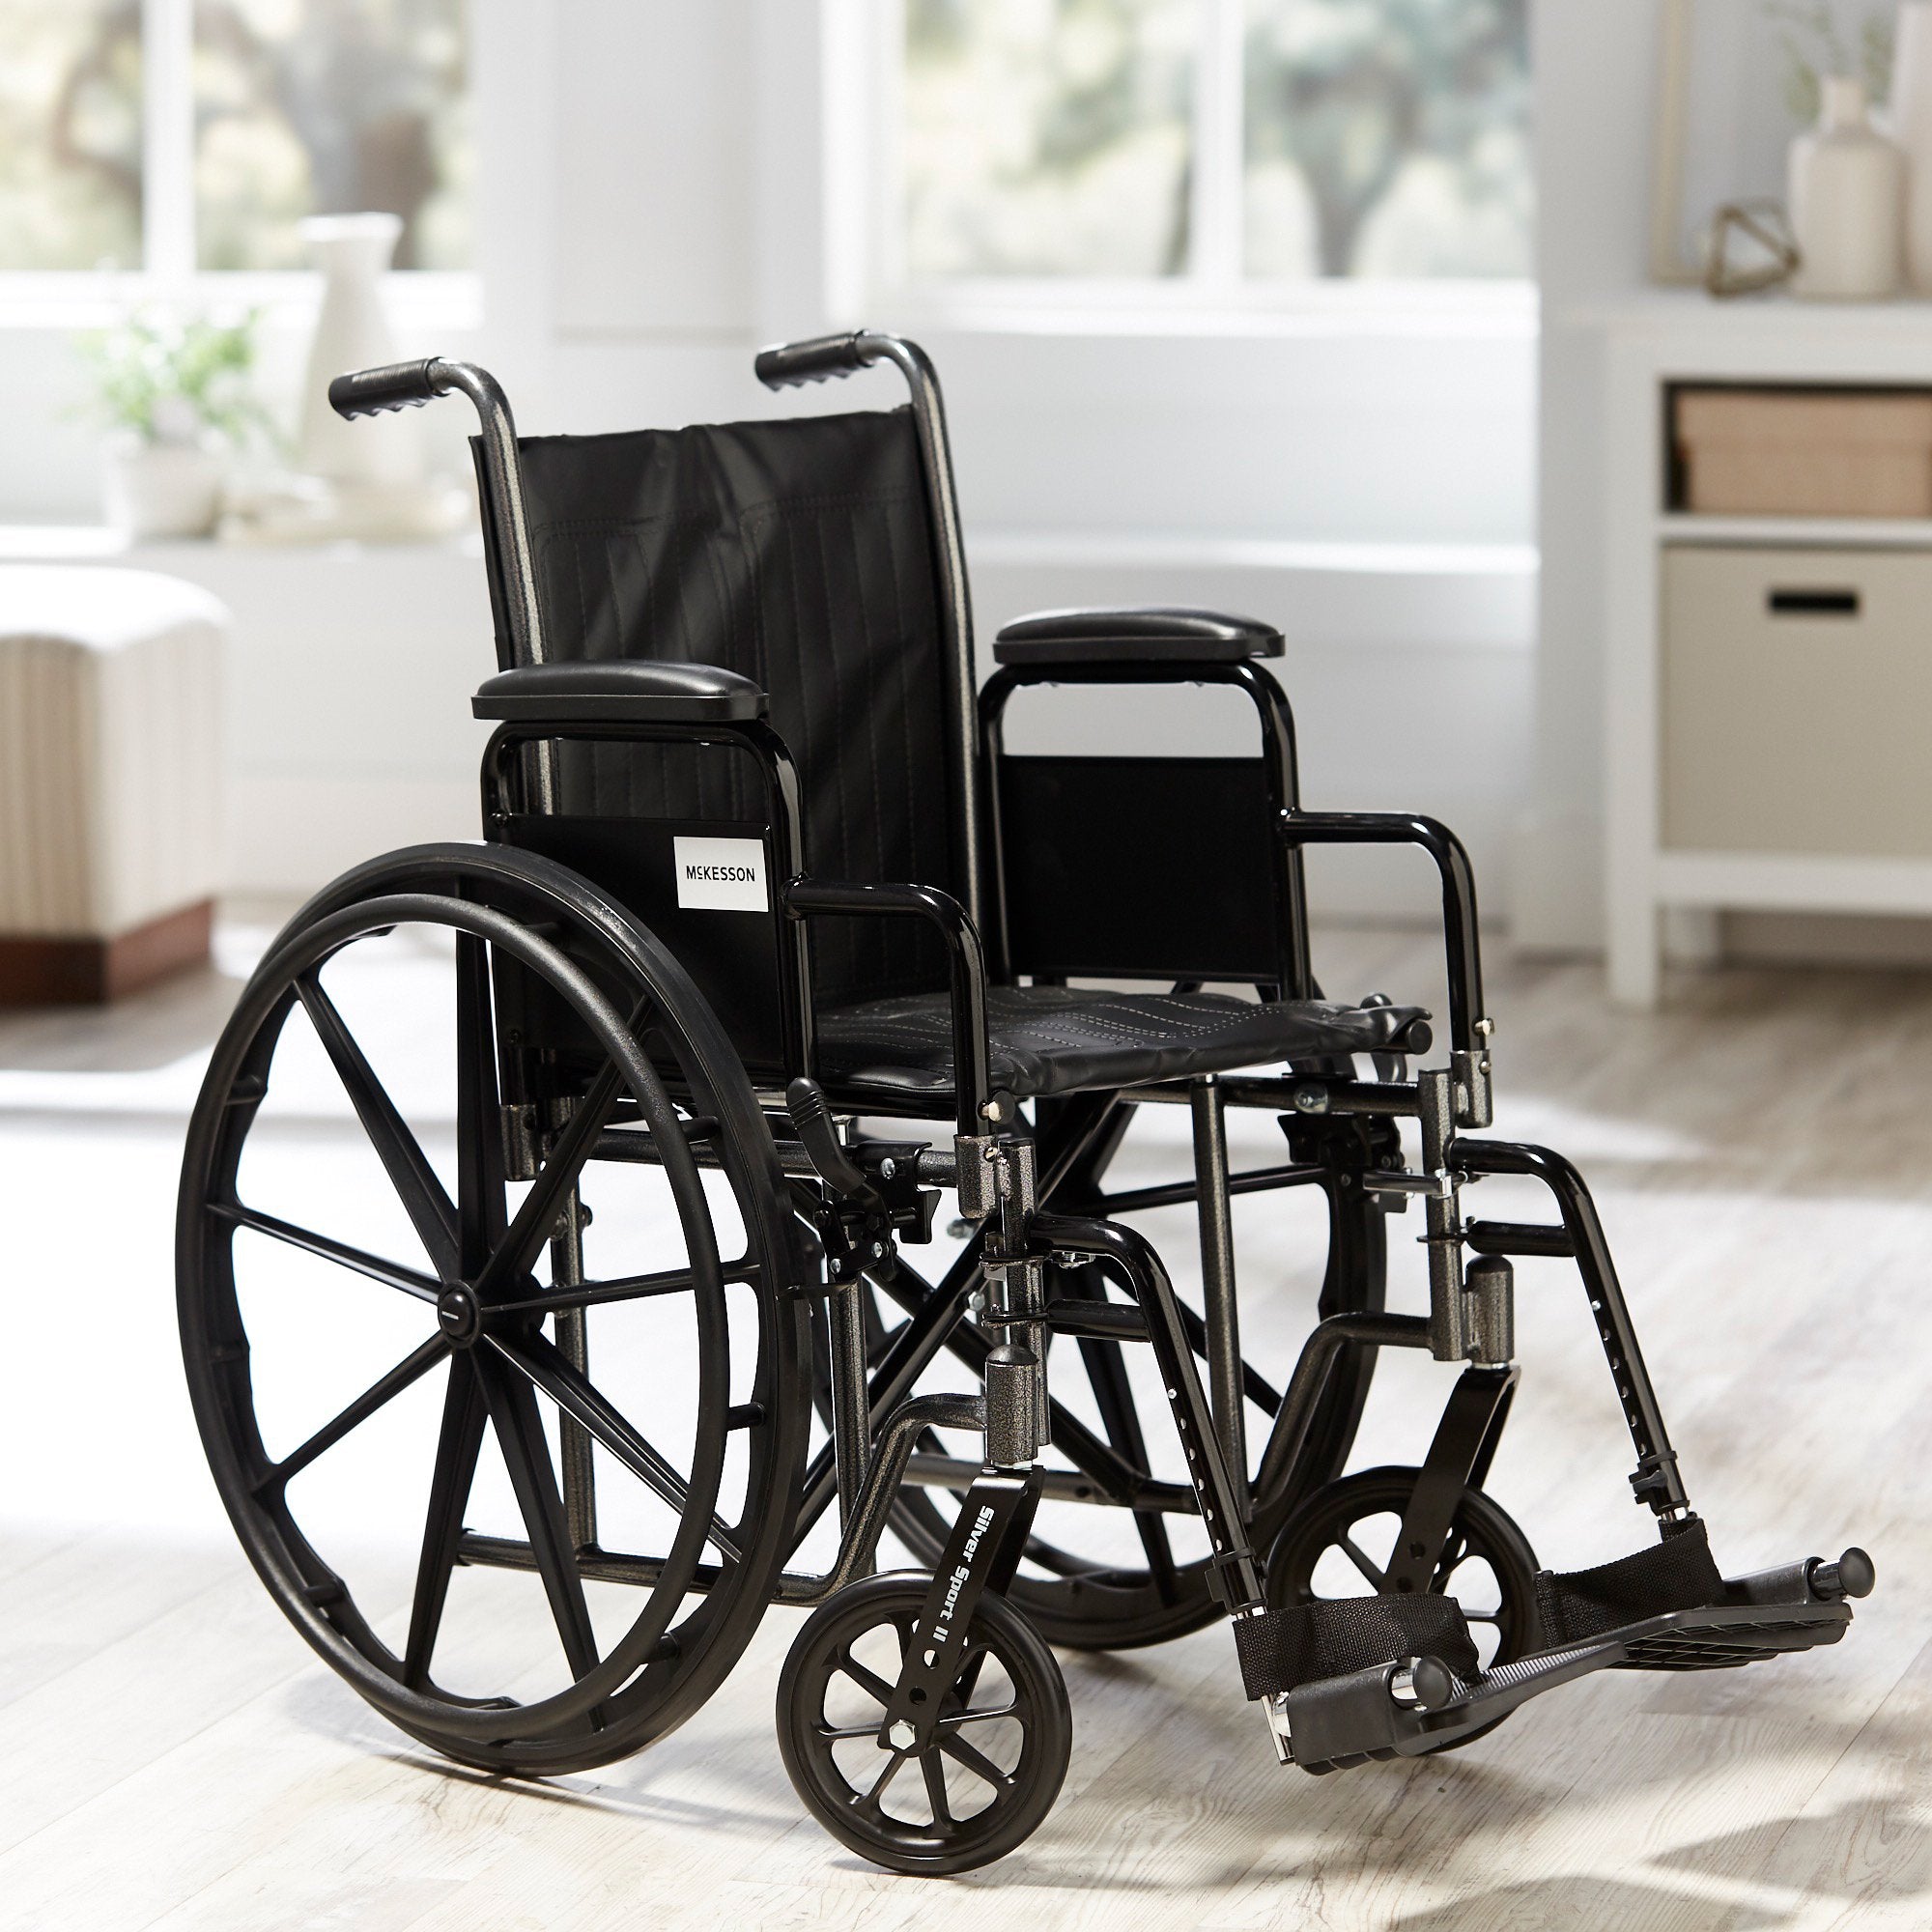 Mobility Aids>Wheelchairs - McKesson - Wasatch Medical Supply